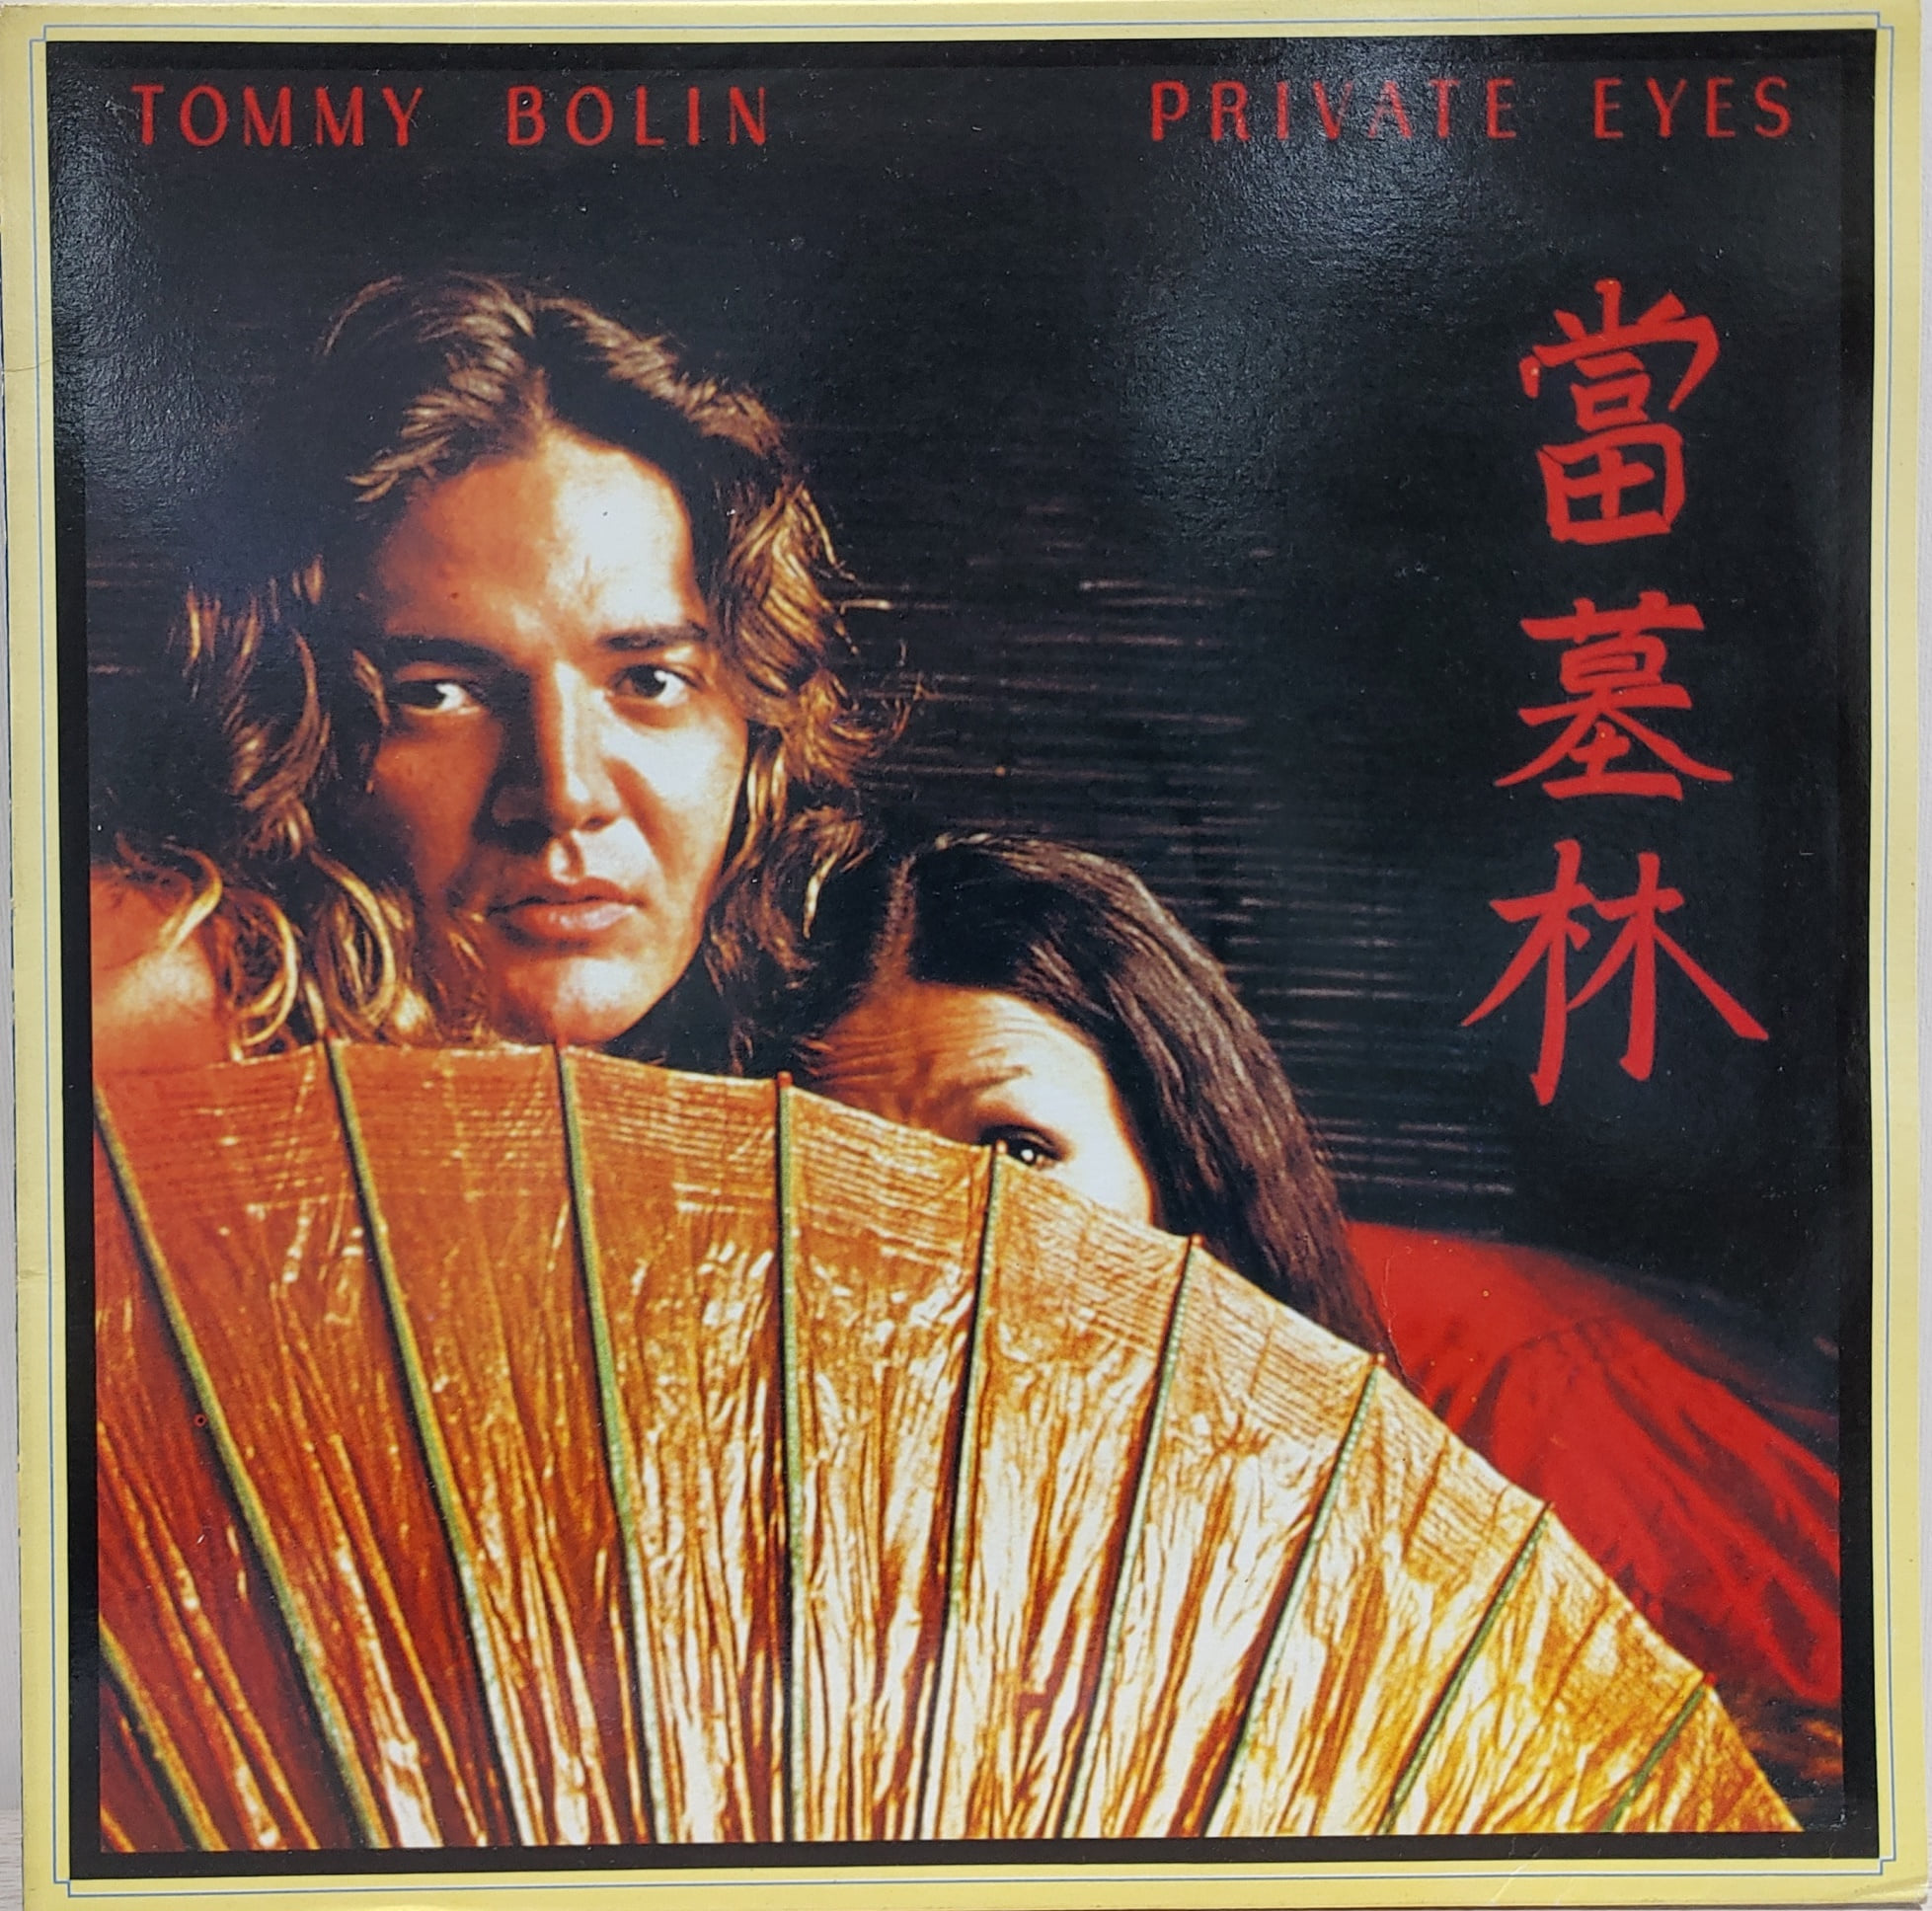 TOMMY BOLIN / PRIVATE EYES